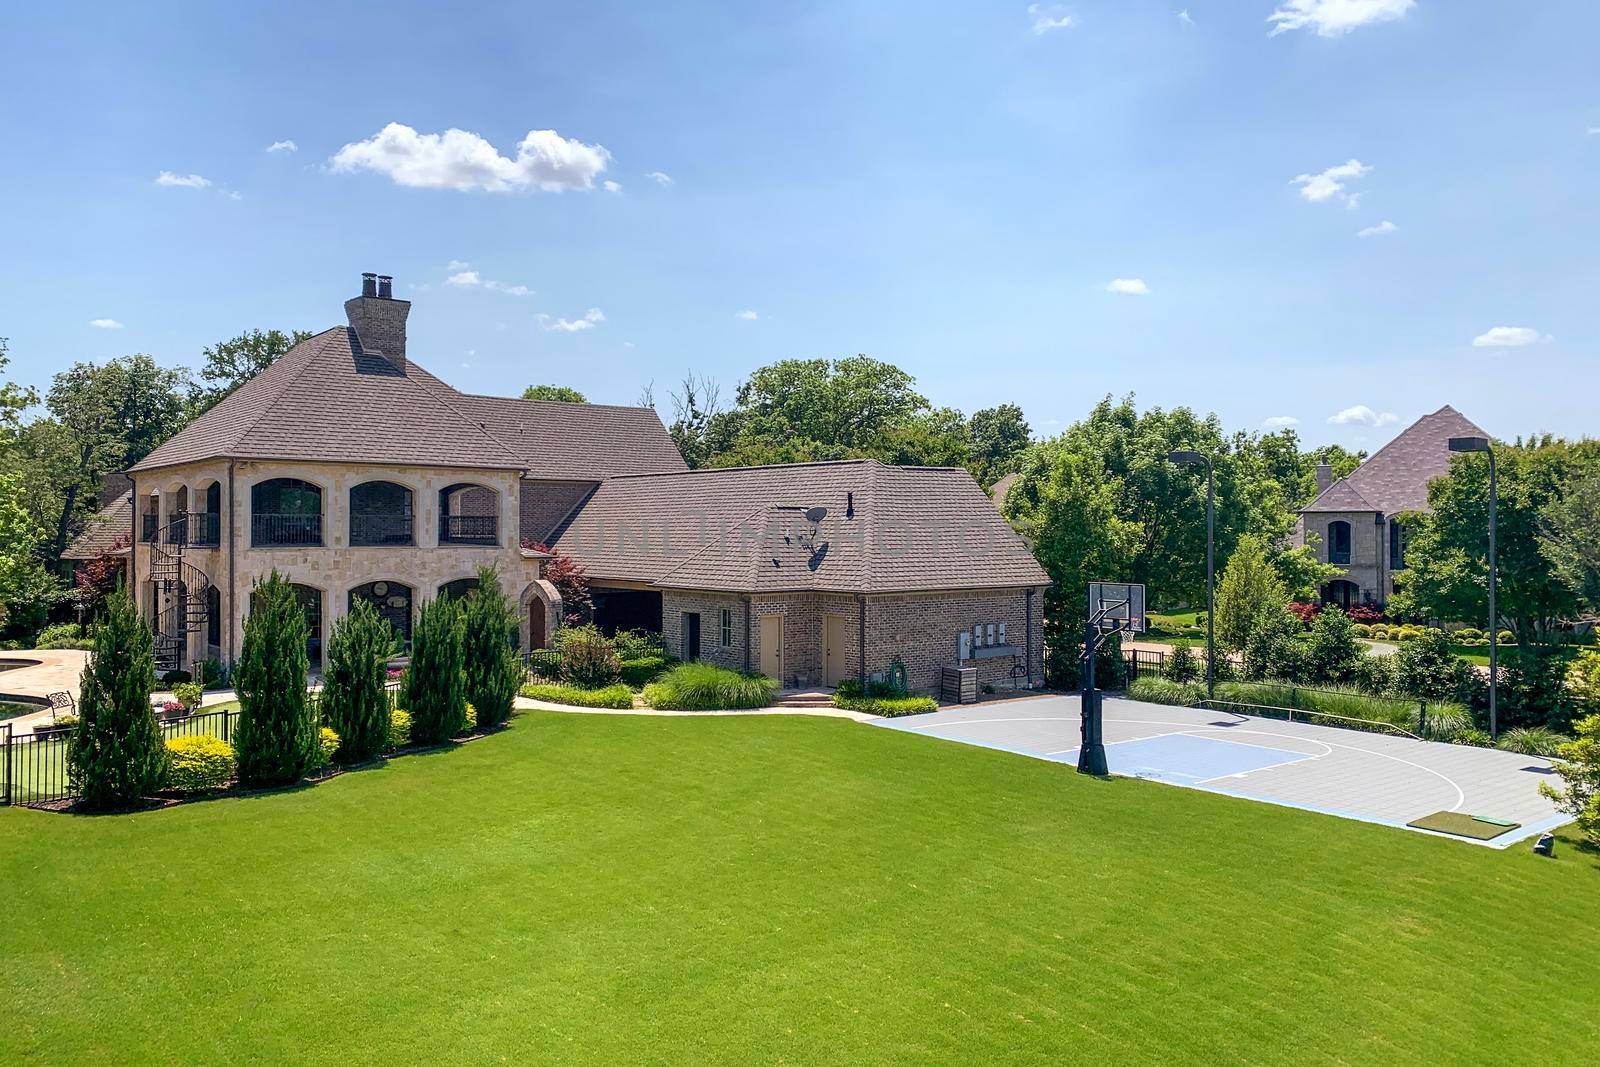 Outdoor shot of luxury house in suburban neighborhood with trees, bushes, lawn and basketball court on the backyard, blue sky background. Real estate concept.